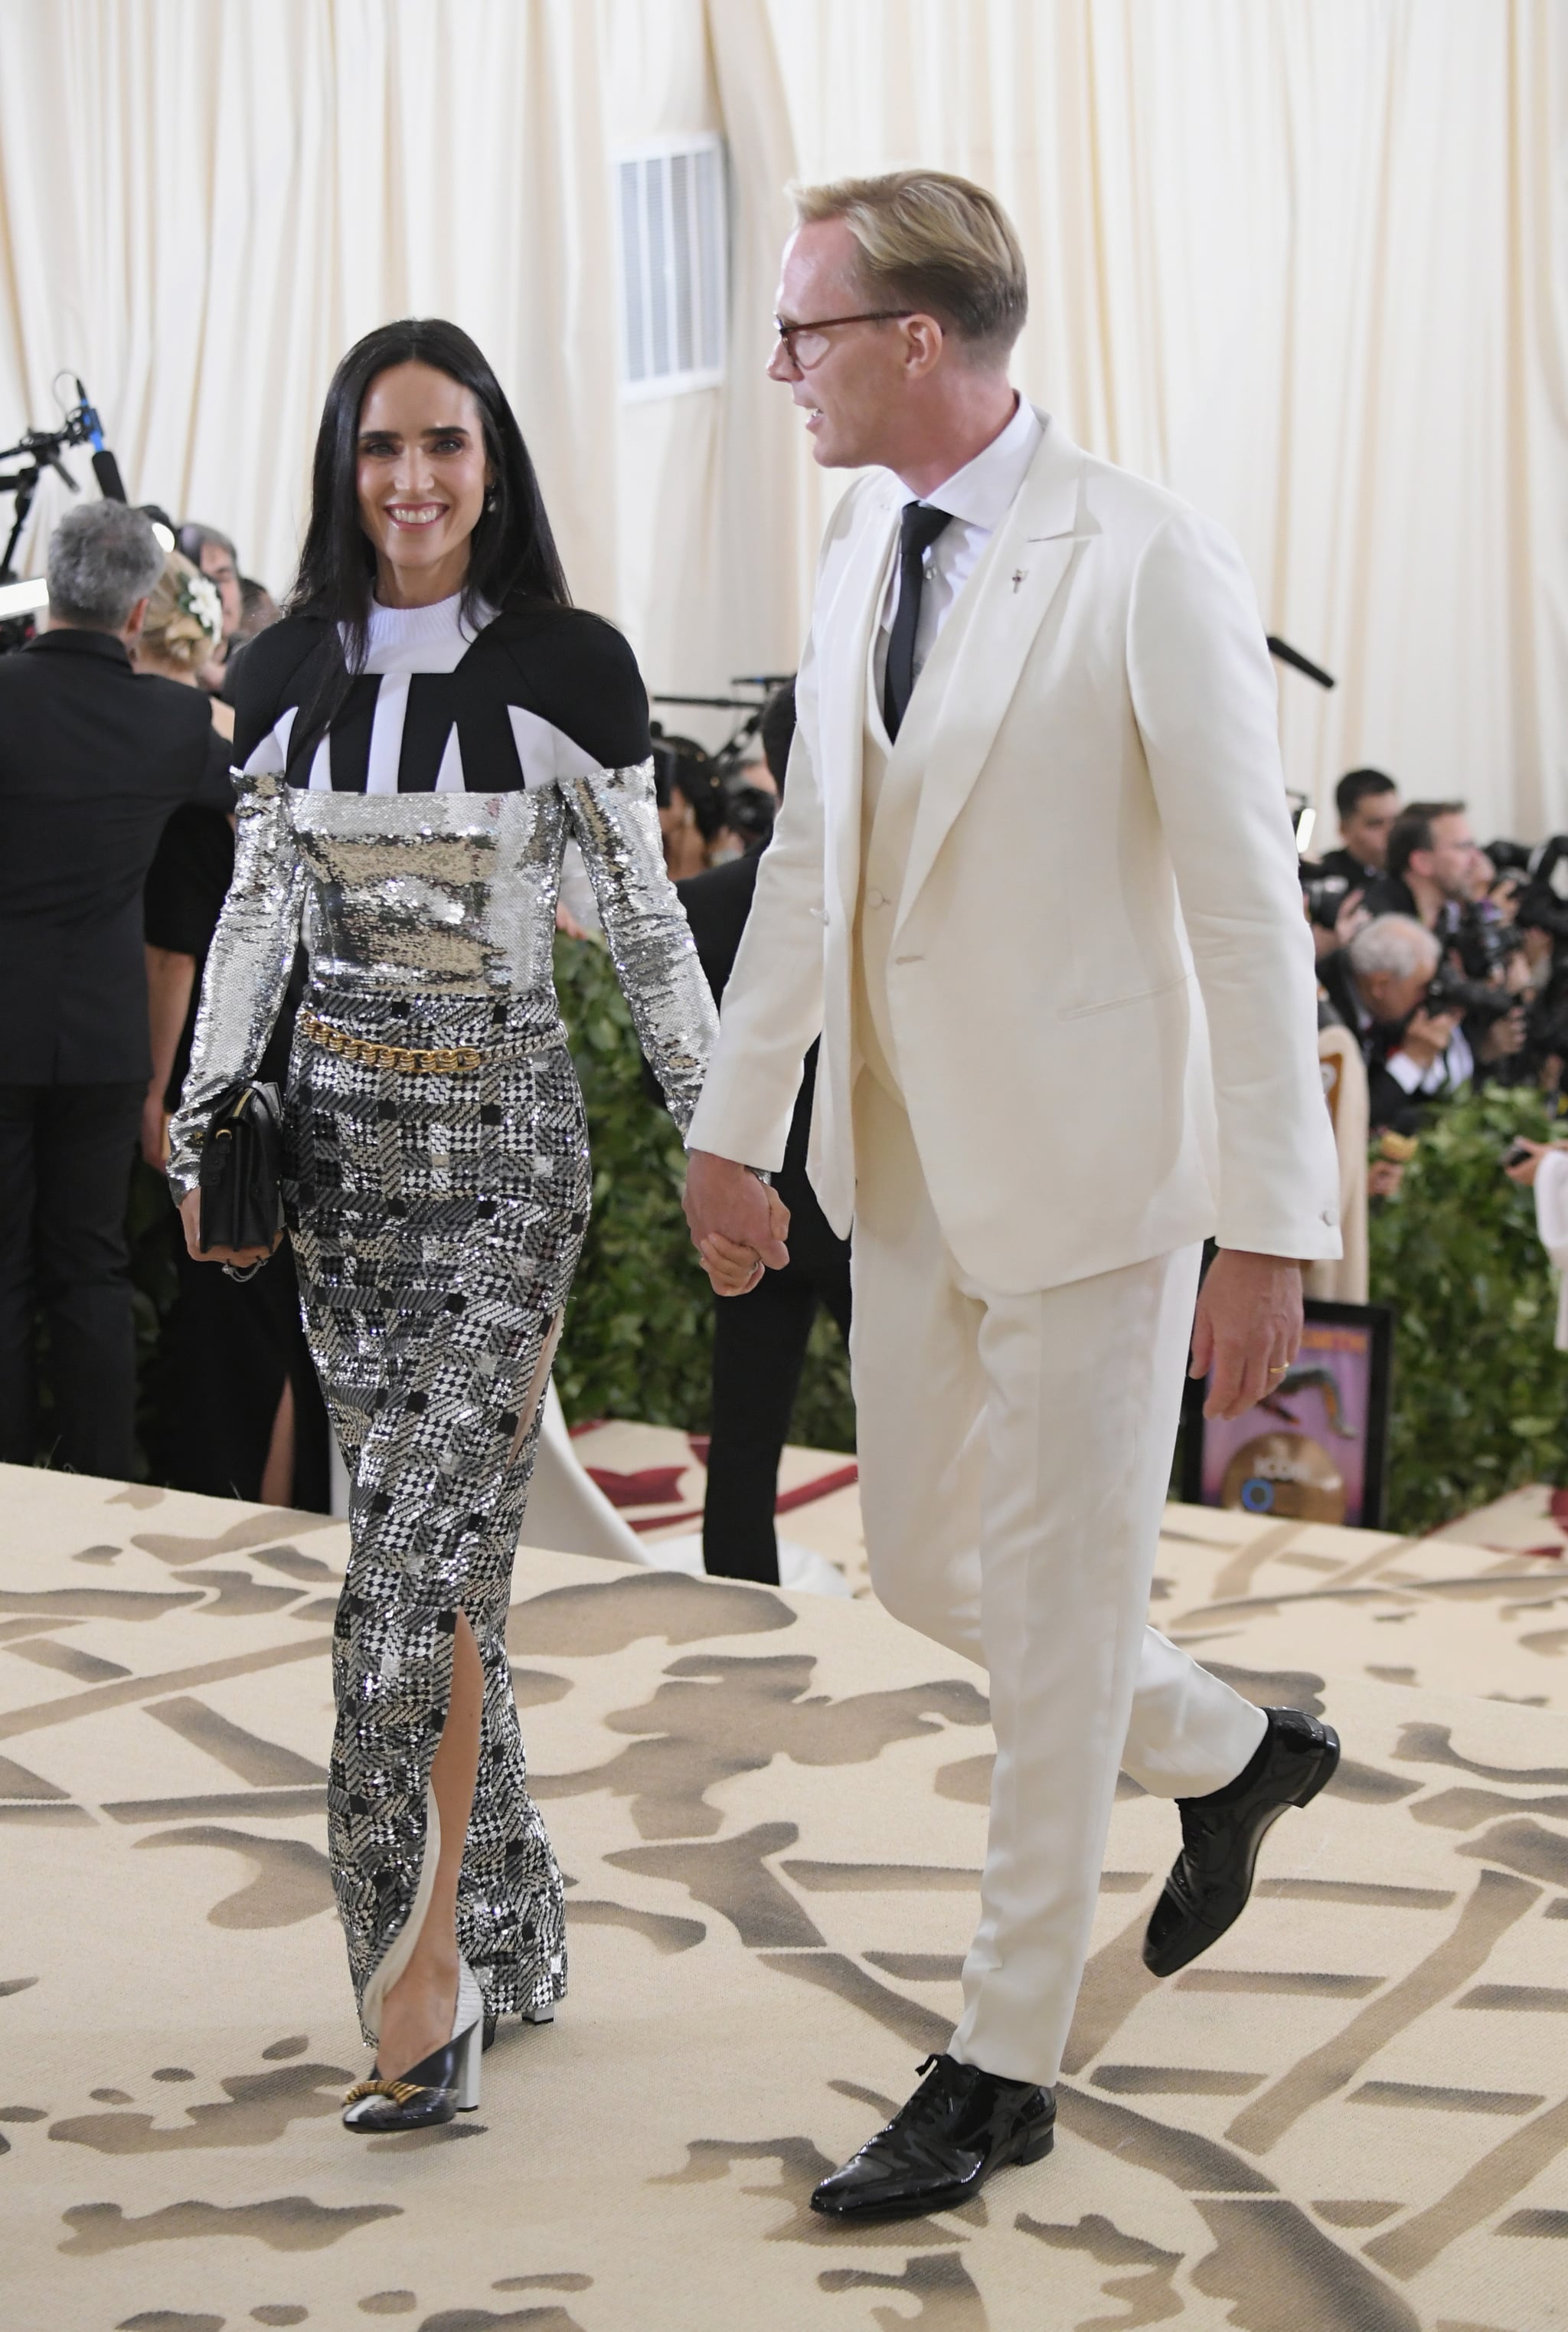 Paul Bettany and Jennifer Connelly at Met Gala 2018